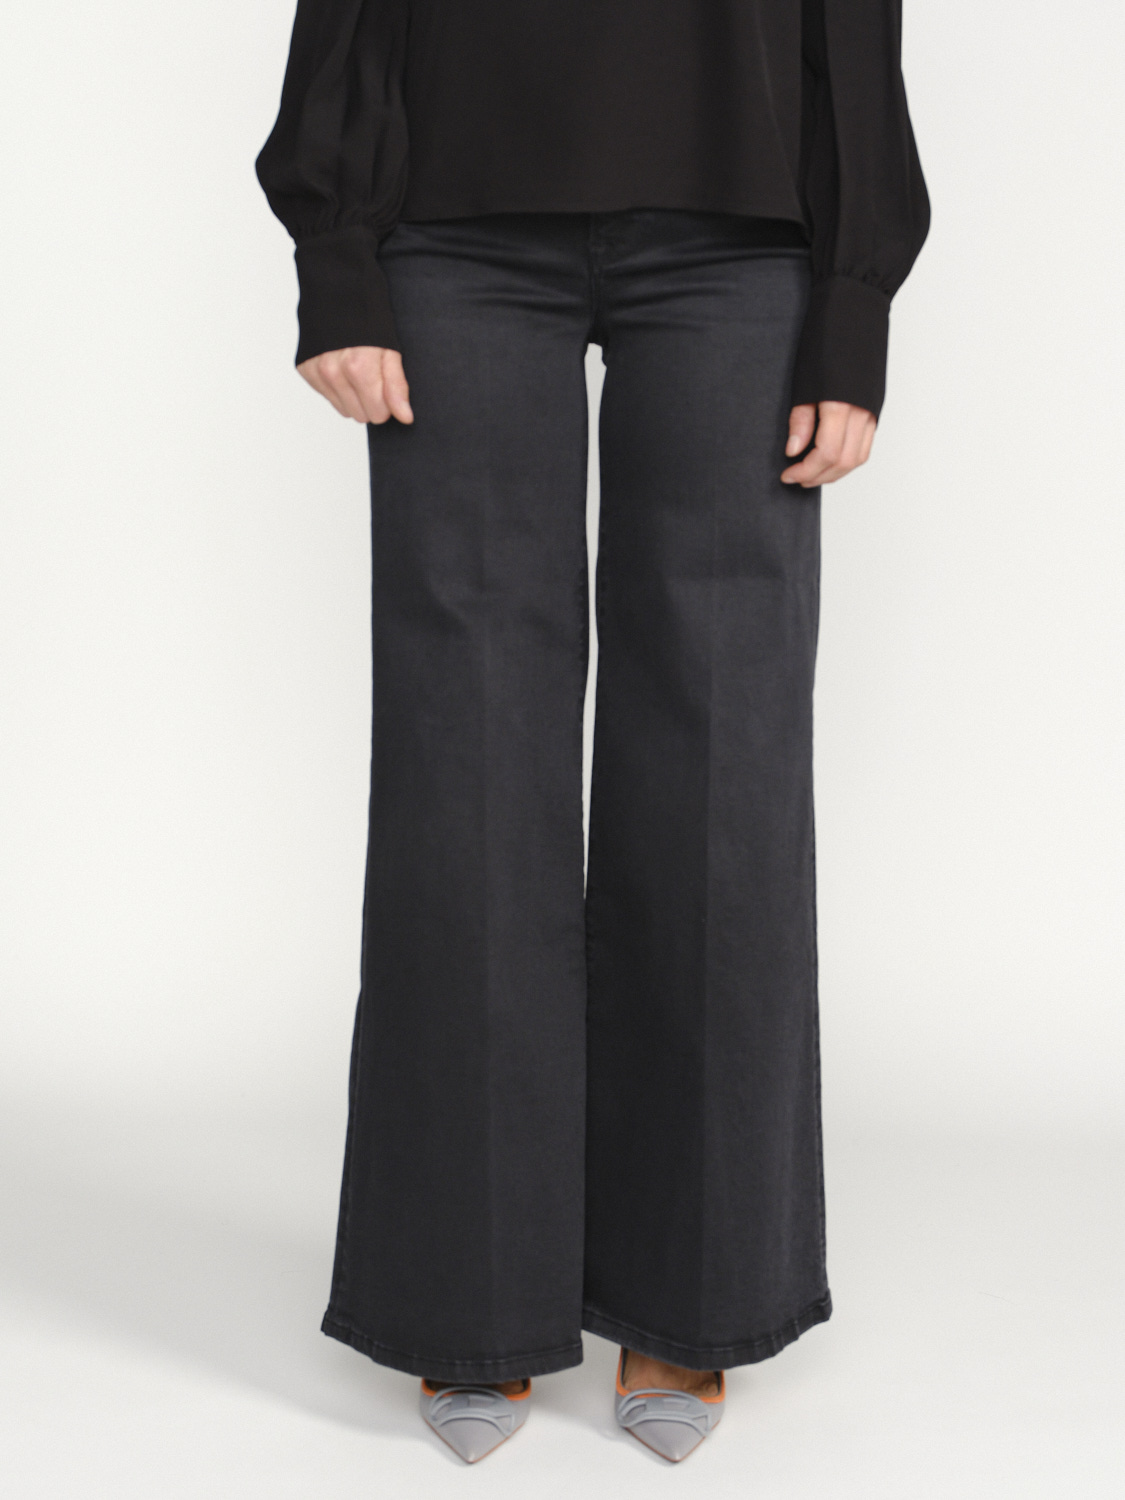 Frame Le Pixie - Jeans trousers with crease black 26